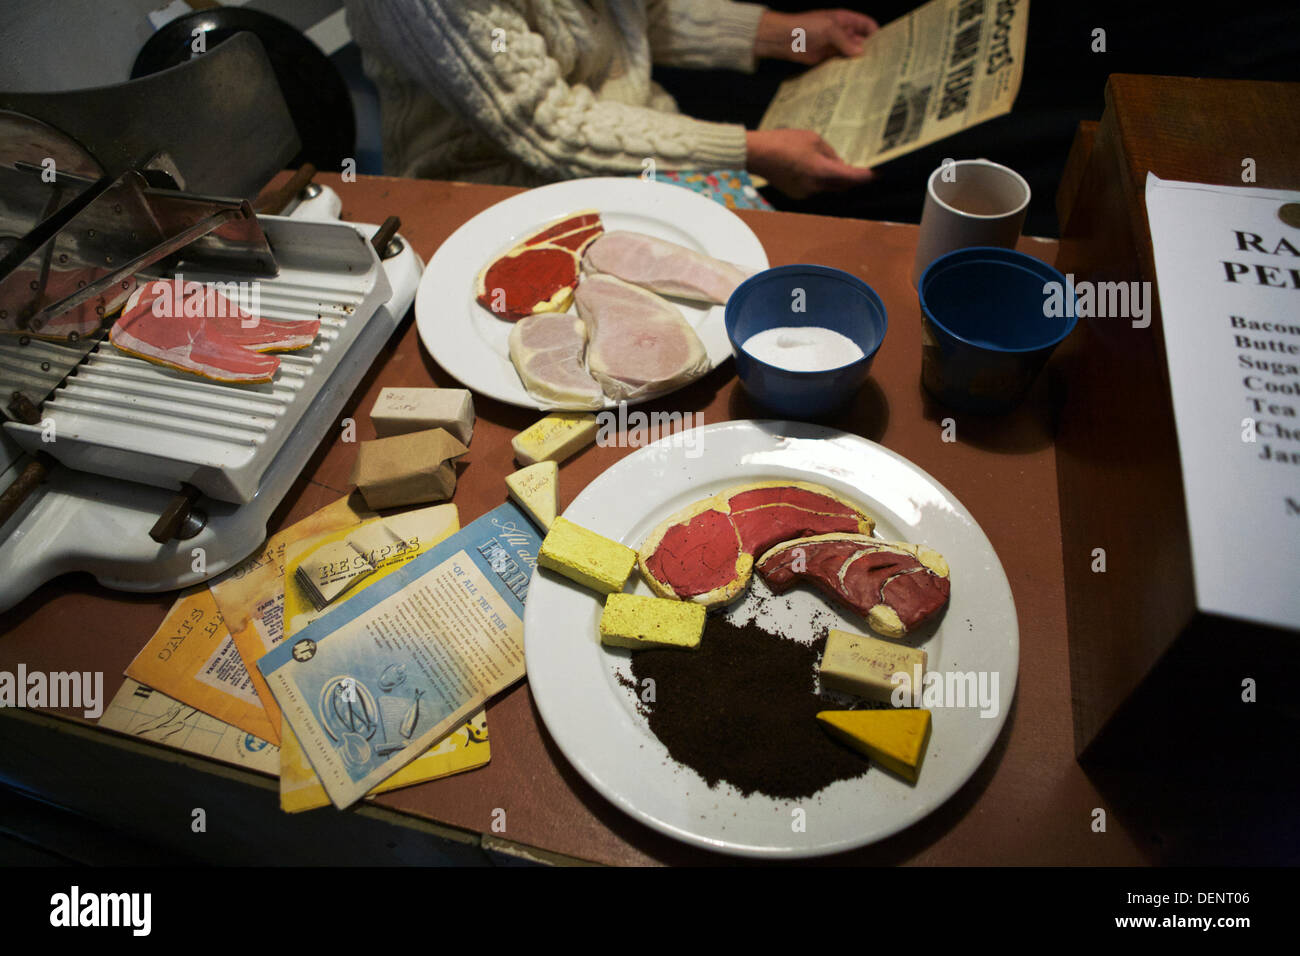 Chatham, UK. 21st Sep, 2013. Salute to the 40's - Britain's 1940's Home Front Event at The Historic Dockyard Chatham. 1940's Weekly food rations displayed - what members of the public were entitled to each week. Credit:  Tony Farrugia/Alamy Live News Stock Photo